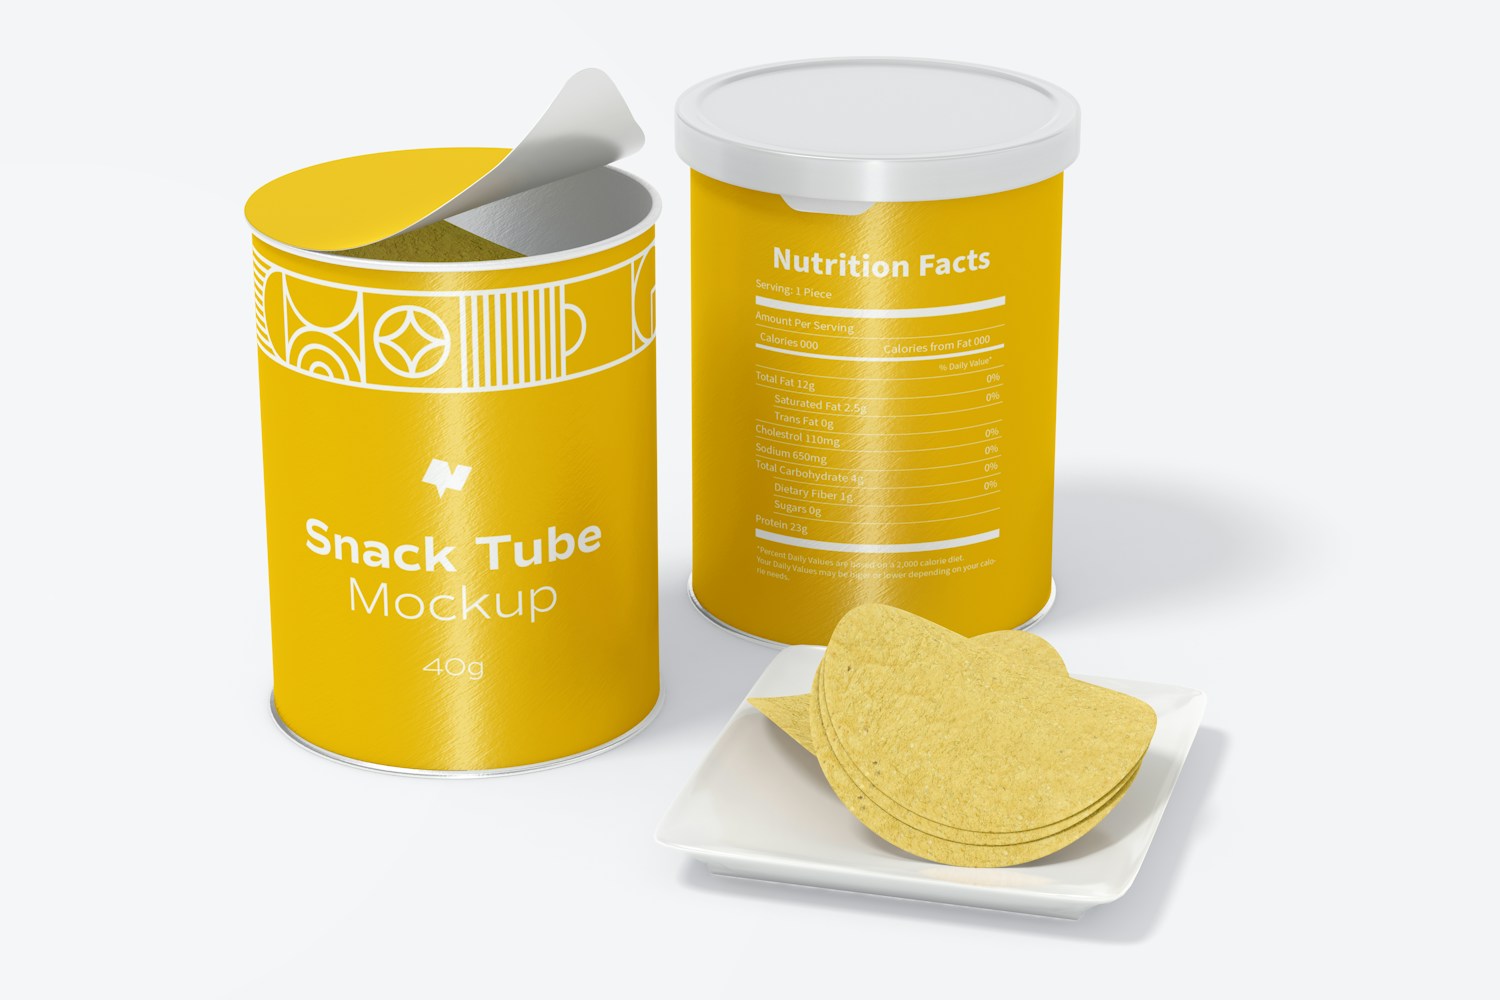 40g Snack Tube Mockup, Opened and Closed